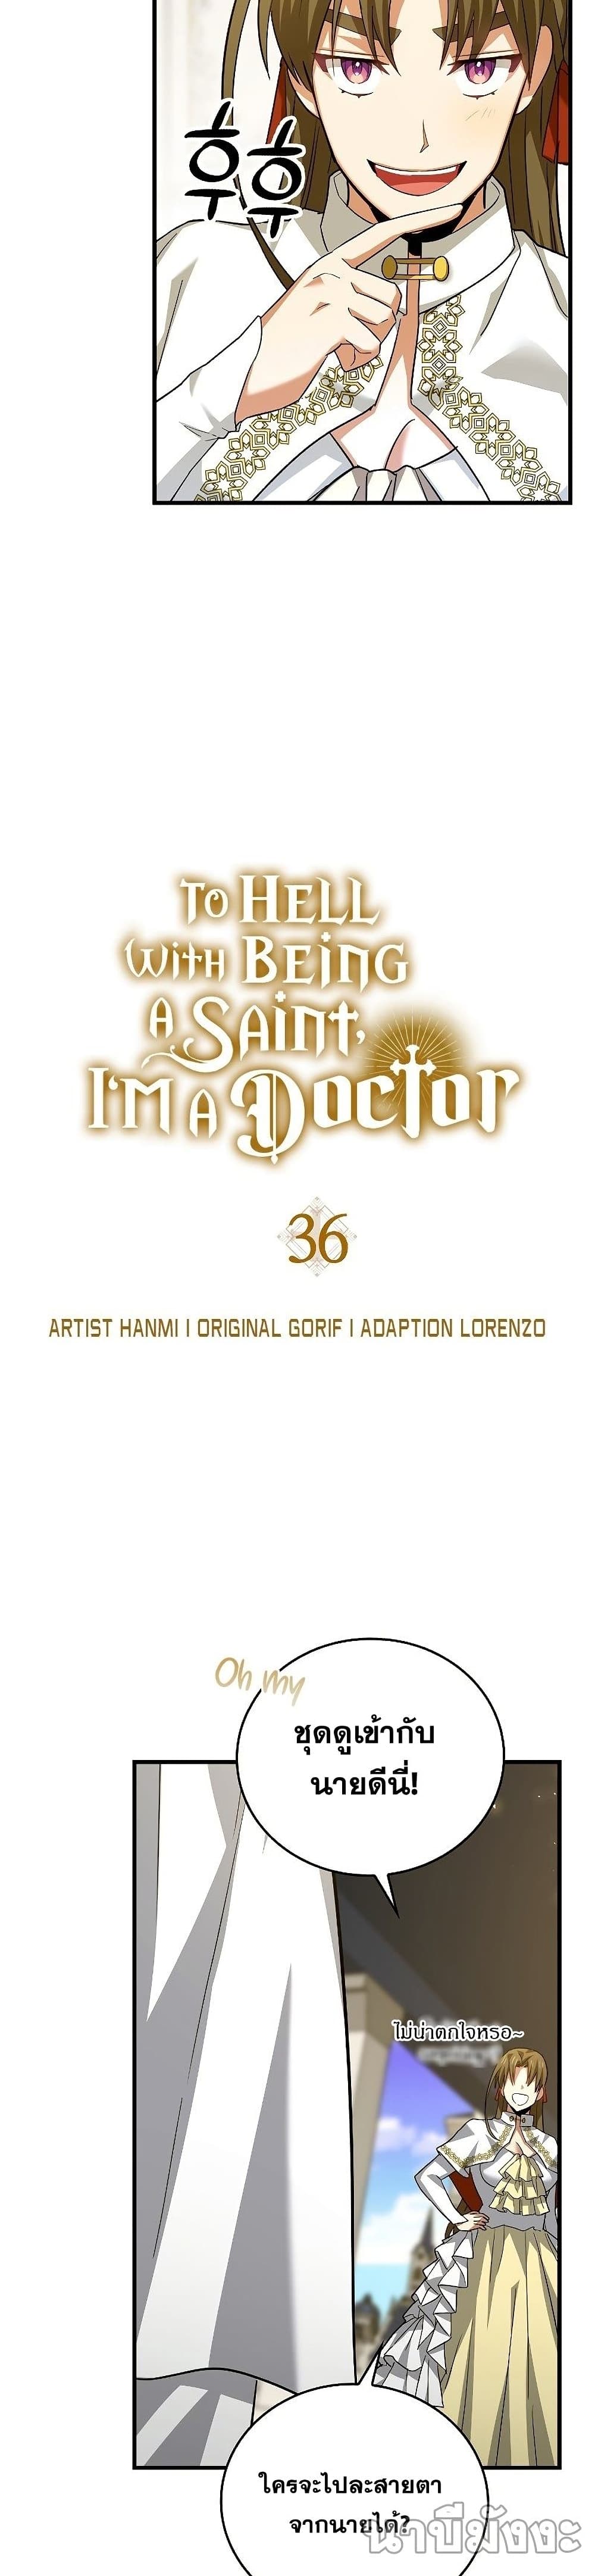 To Hell With Being A Saint, I’m A Doctor 36-36